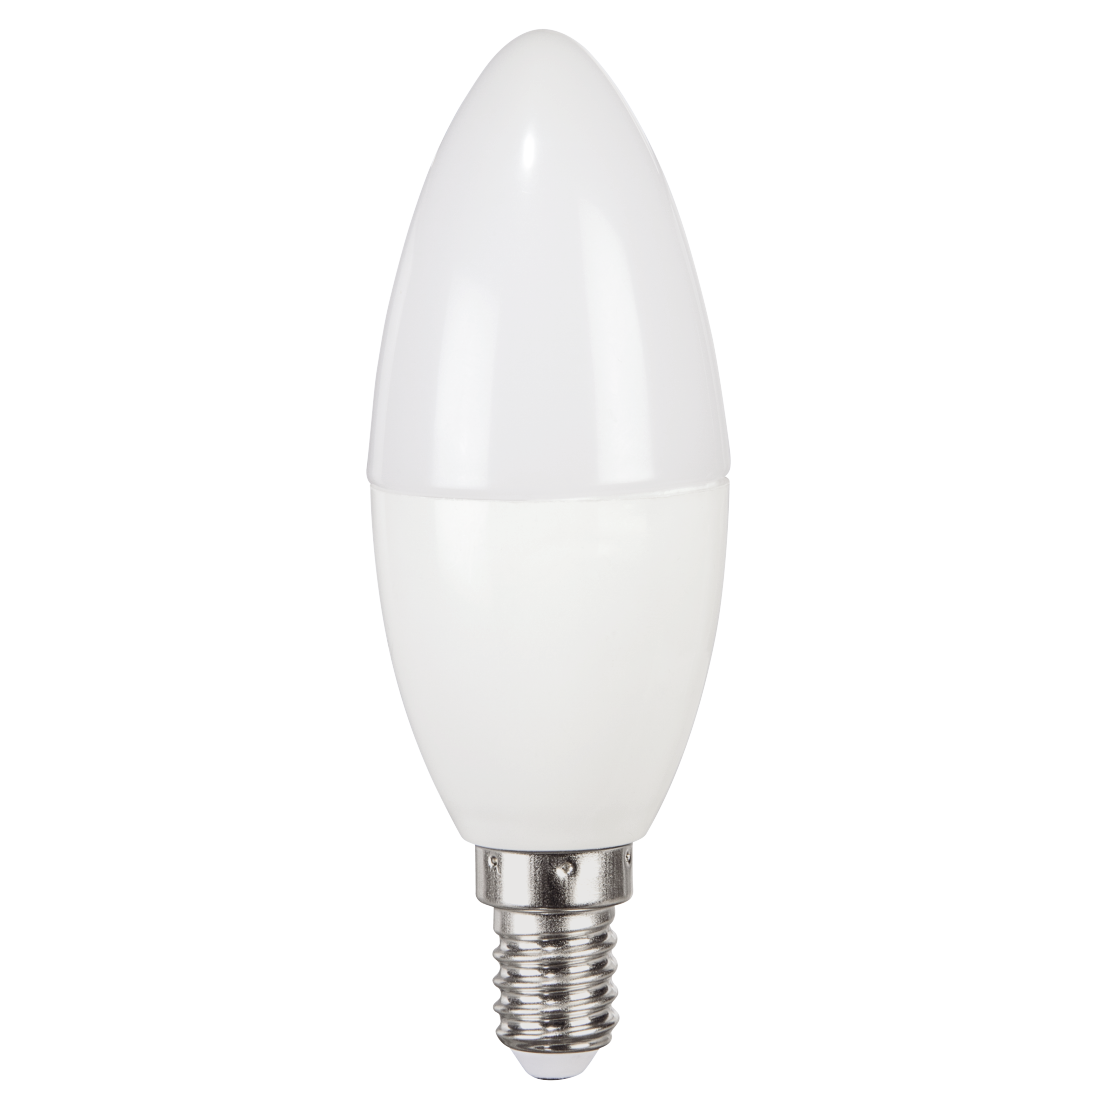 abx High-Res Image - Xavax, LED Bulb, E14, 470 lm Replaces 40W, Candle Bulb, neutral white